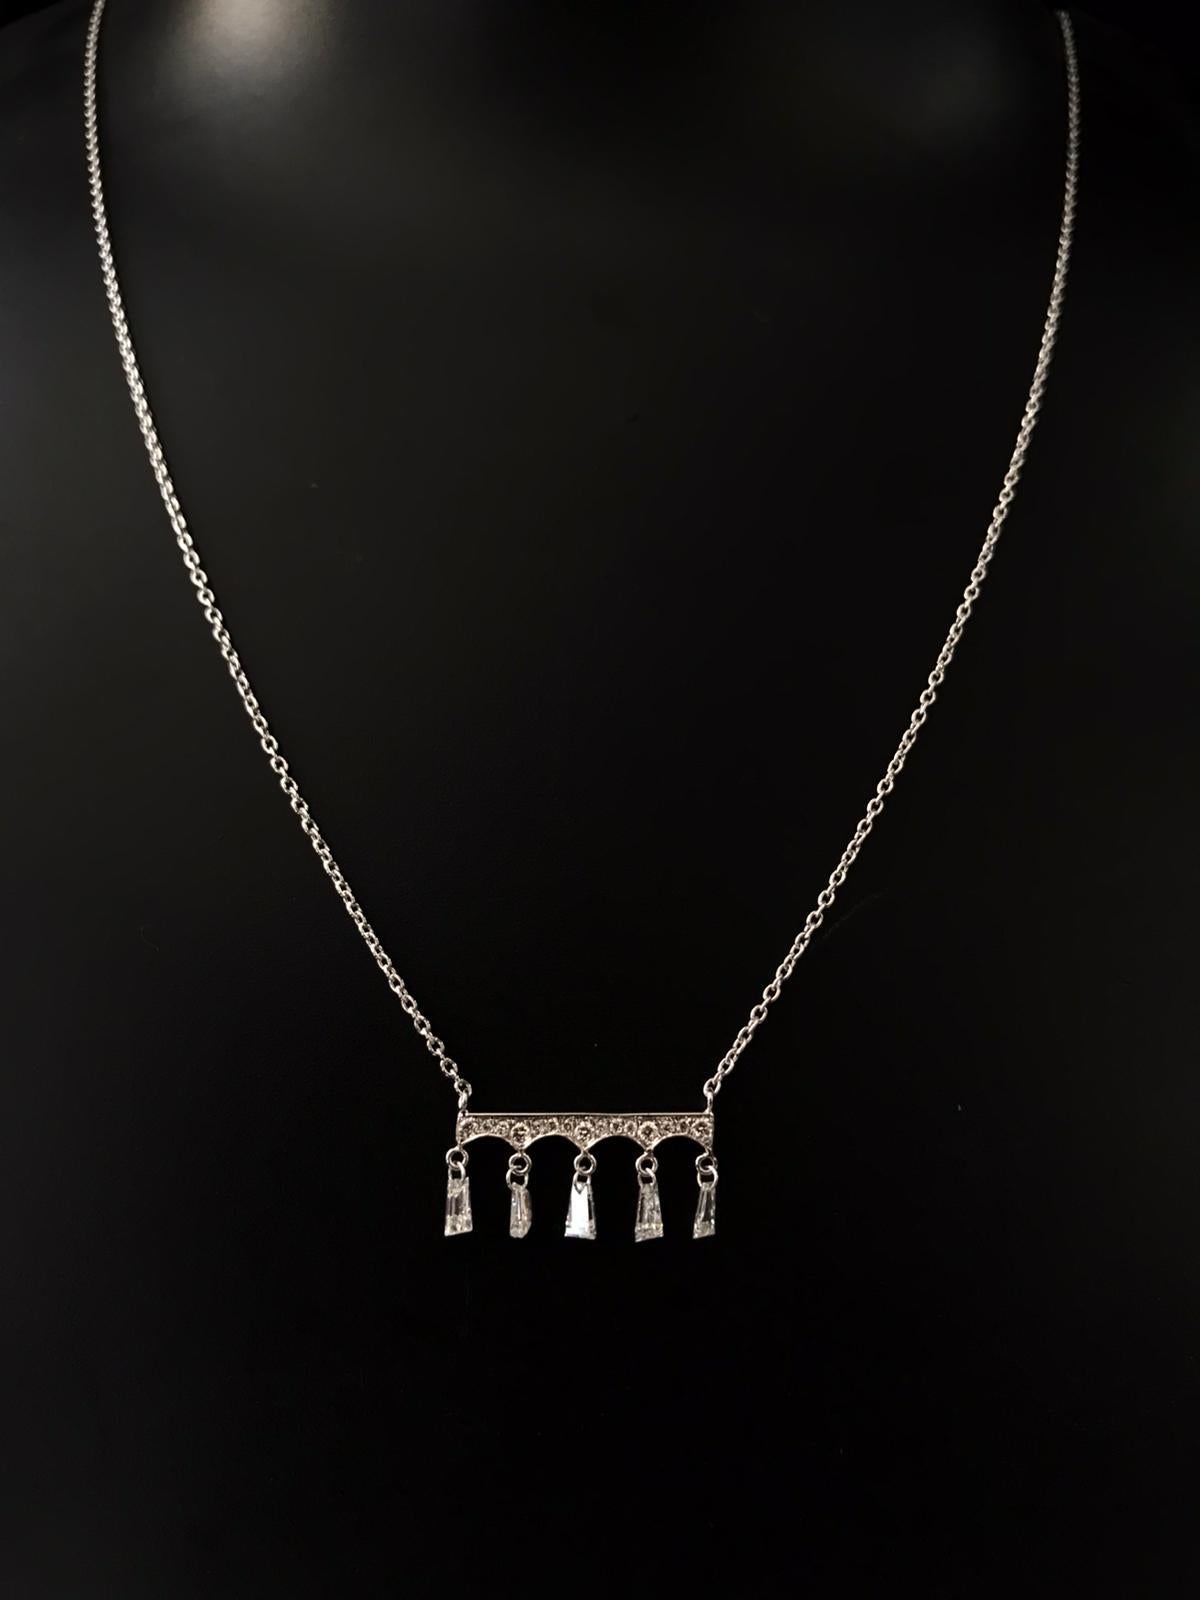 PANIM 0.36 Carat Diamond Baguette Pendant Necklace

This Panim necklace features a stunning diamond baguette pendant that catches the light beautifully. Its sleek and minimalist design makes it perfect for both casual and formal occasions. If you're